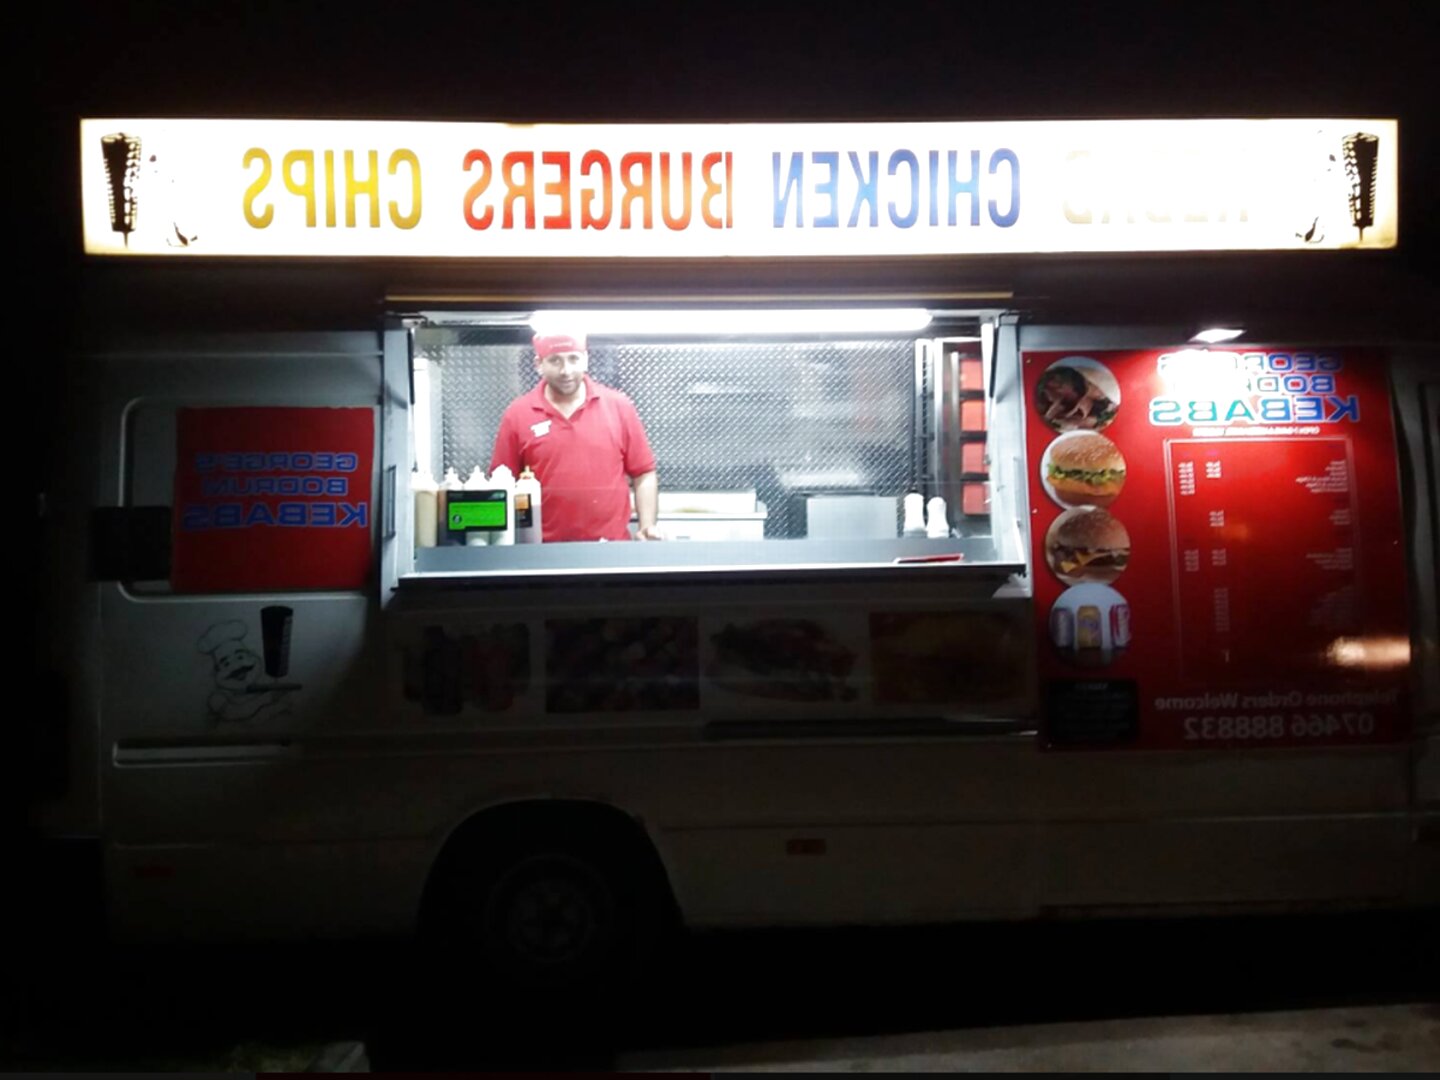 kebab van for sale with pitch